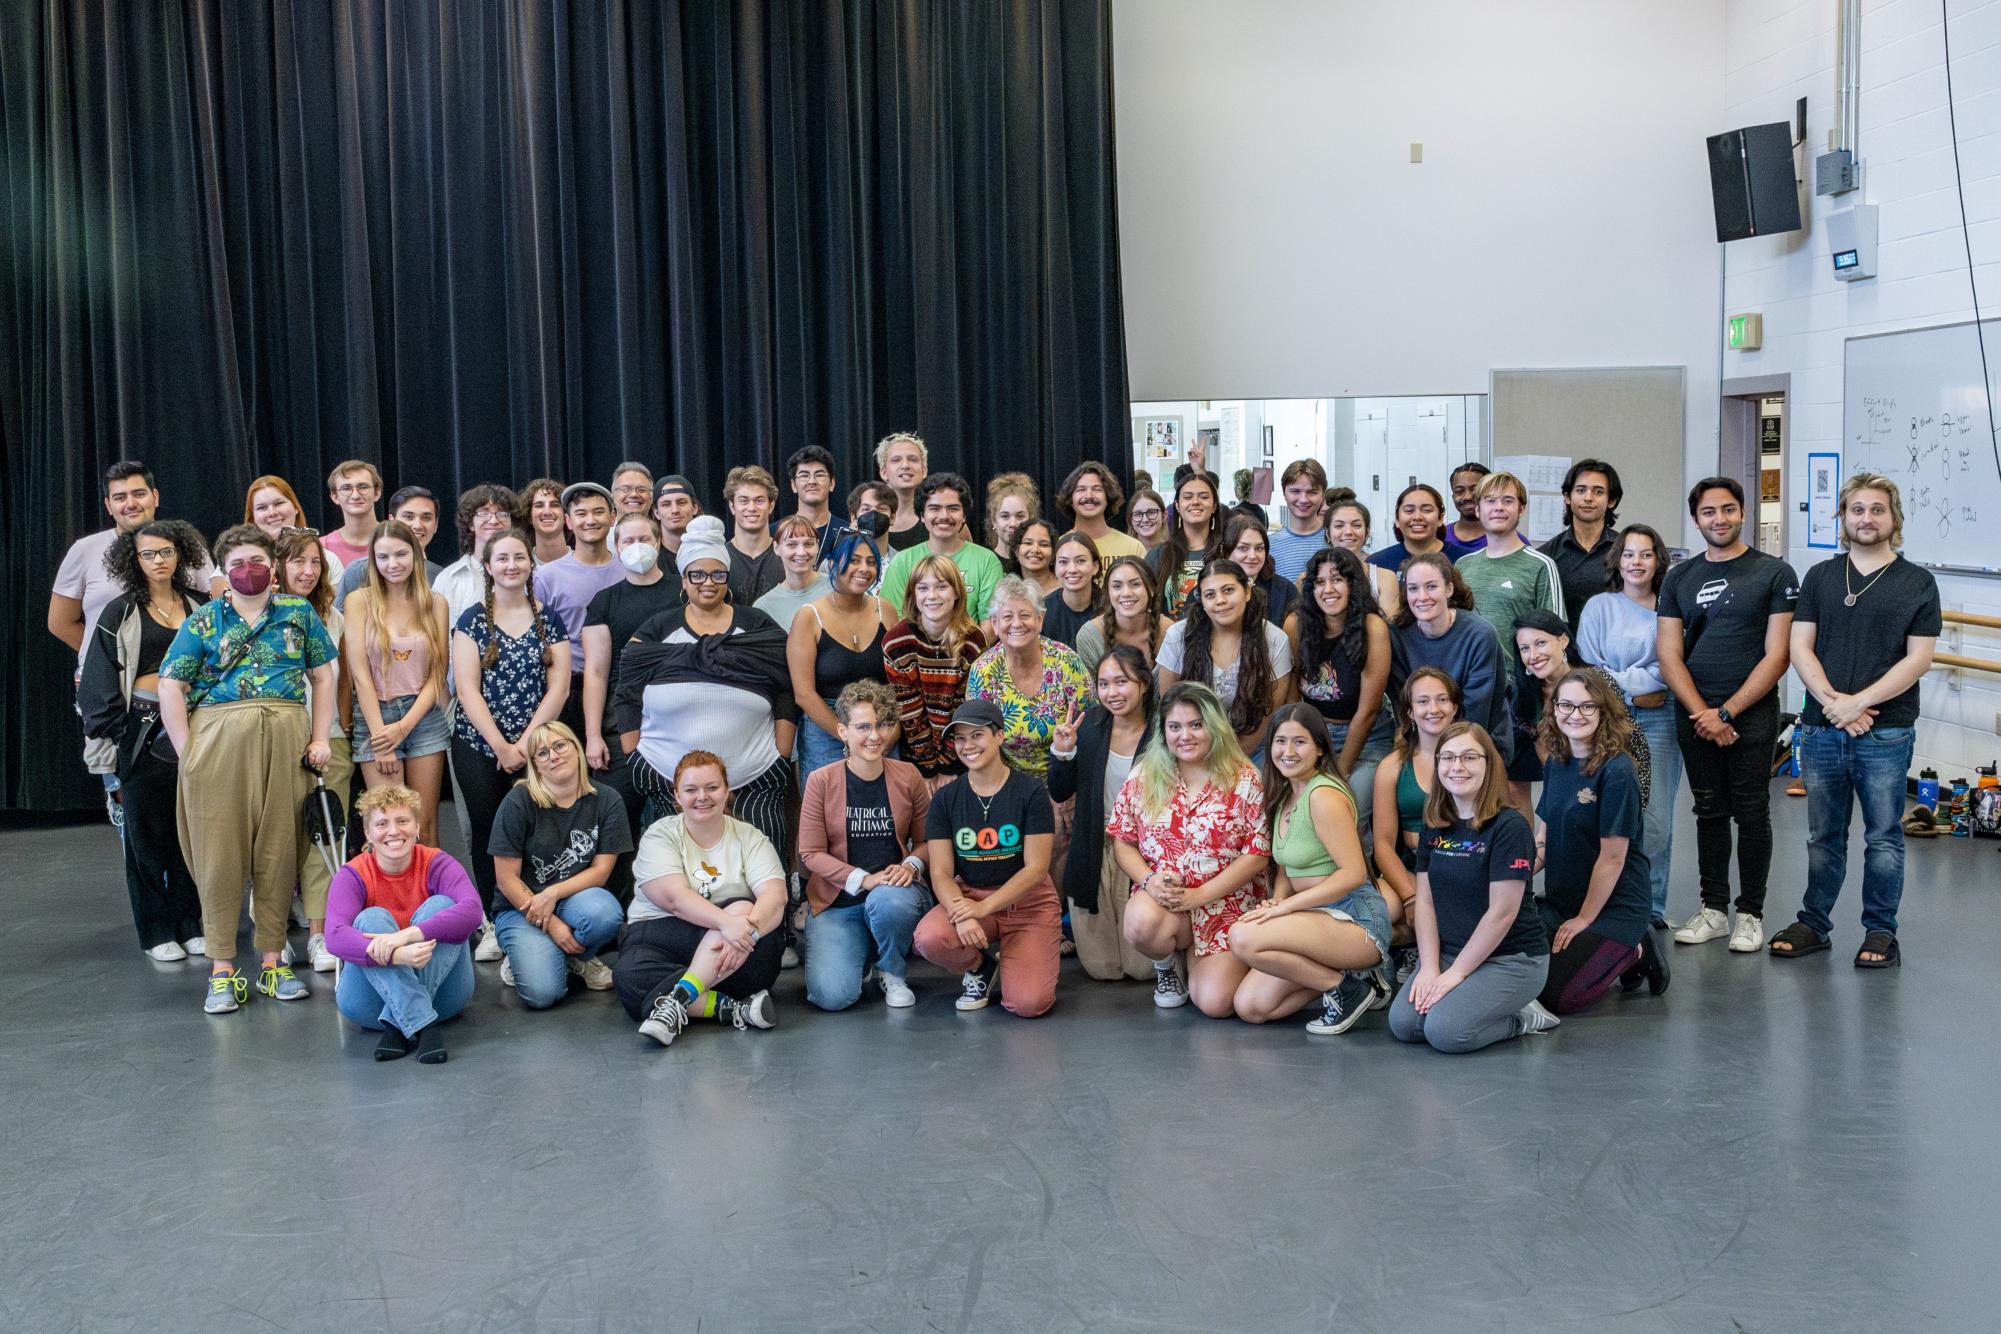 Over 50 Moorpark College performing arts students participate in the Theatrical Intimacy Education seminar on Sep. 8, 2023. Photo credit: Heidi Martin